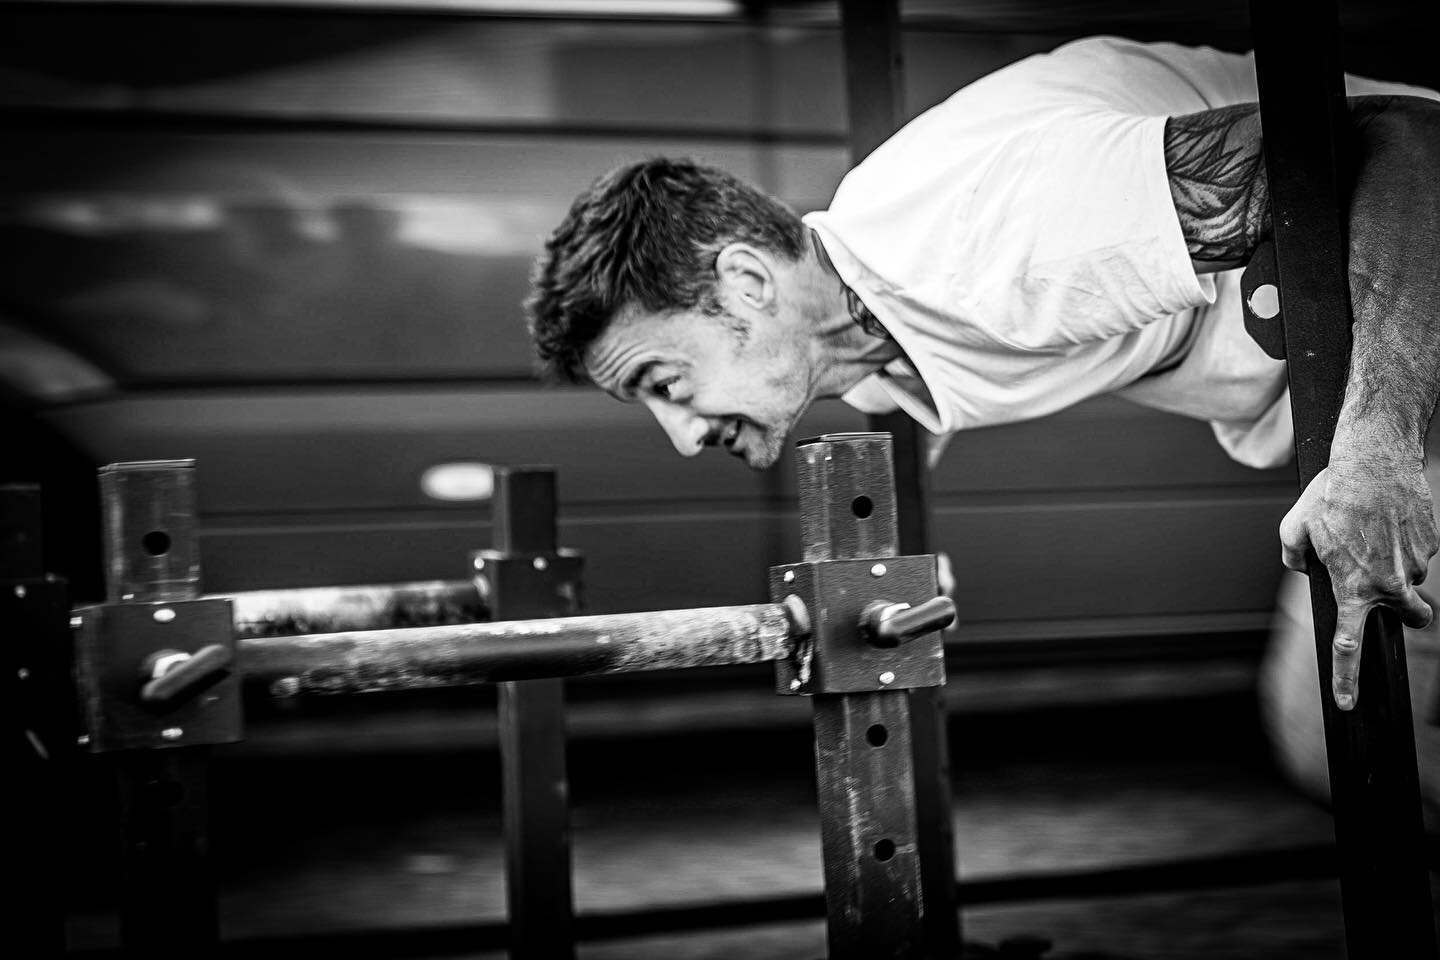 The darkness of the sled push. Remy pushing hard during the @strongfit1 seminar 

#fitness #blackandwhite #alphashooters #sonya7riii #movement